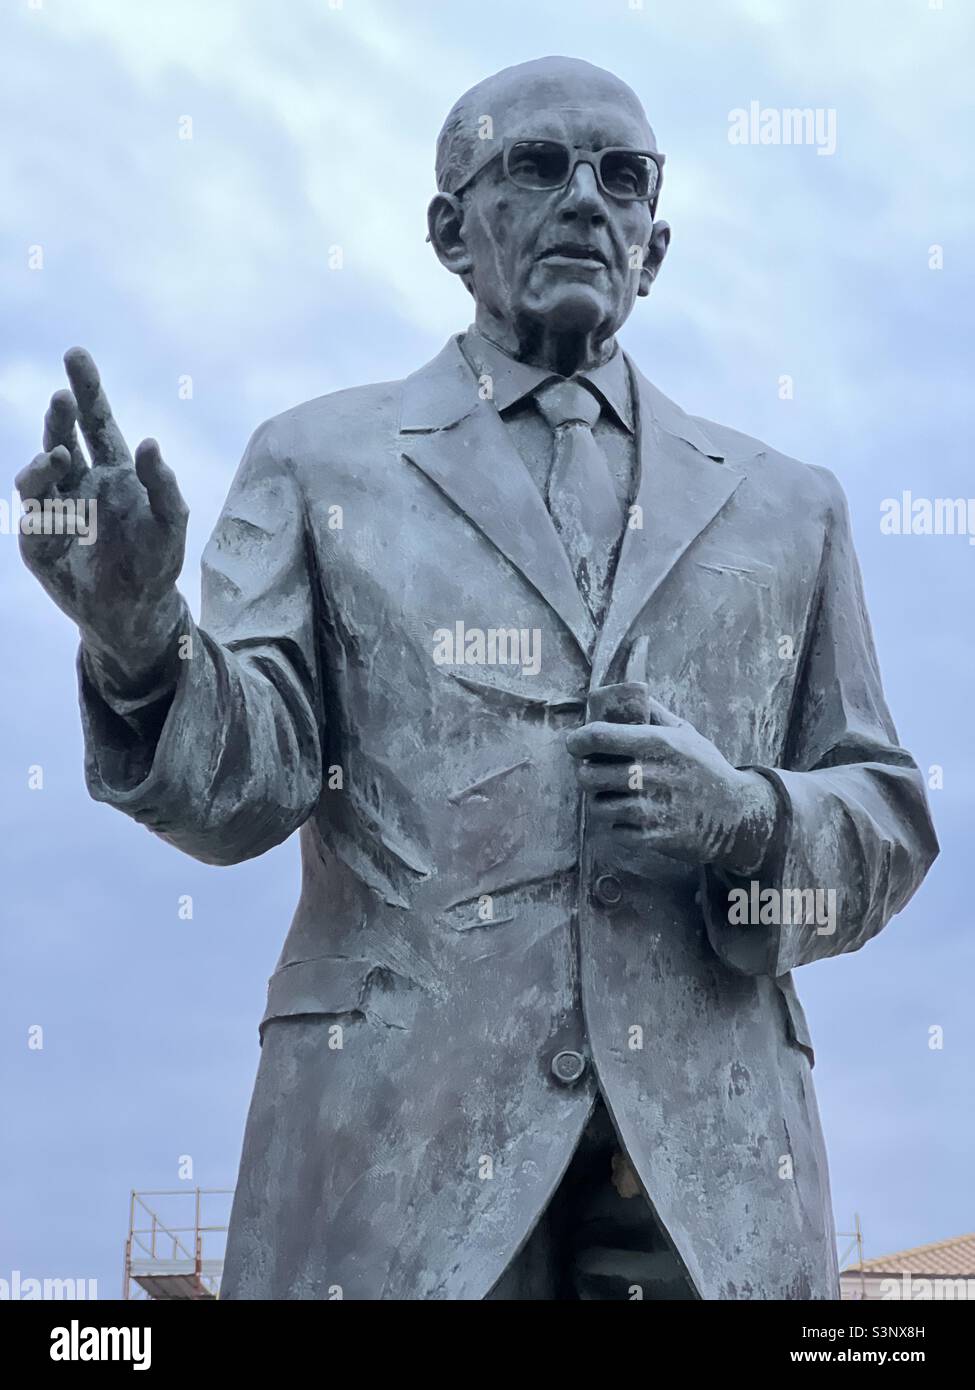 Bronze monument of Sandro Pertini, Italian journalist, partisan and socialist politician who served as the president of Italy, from 1978 to 1985, Nereto, Abruzzi region Stock Photo